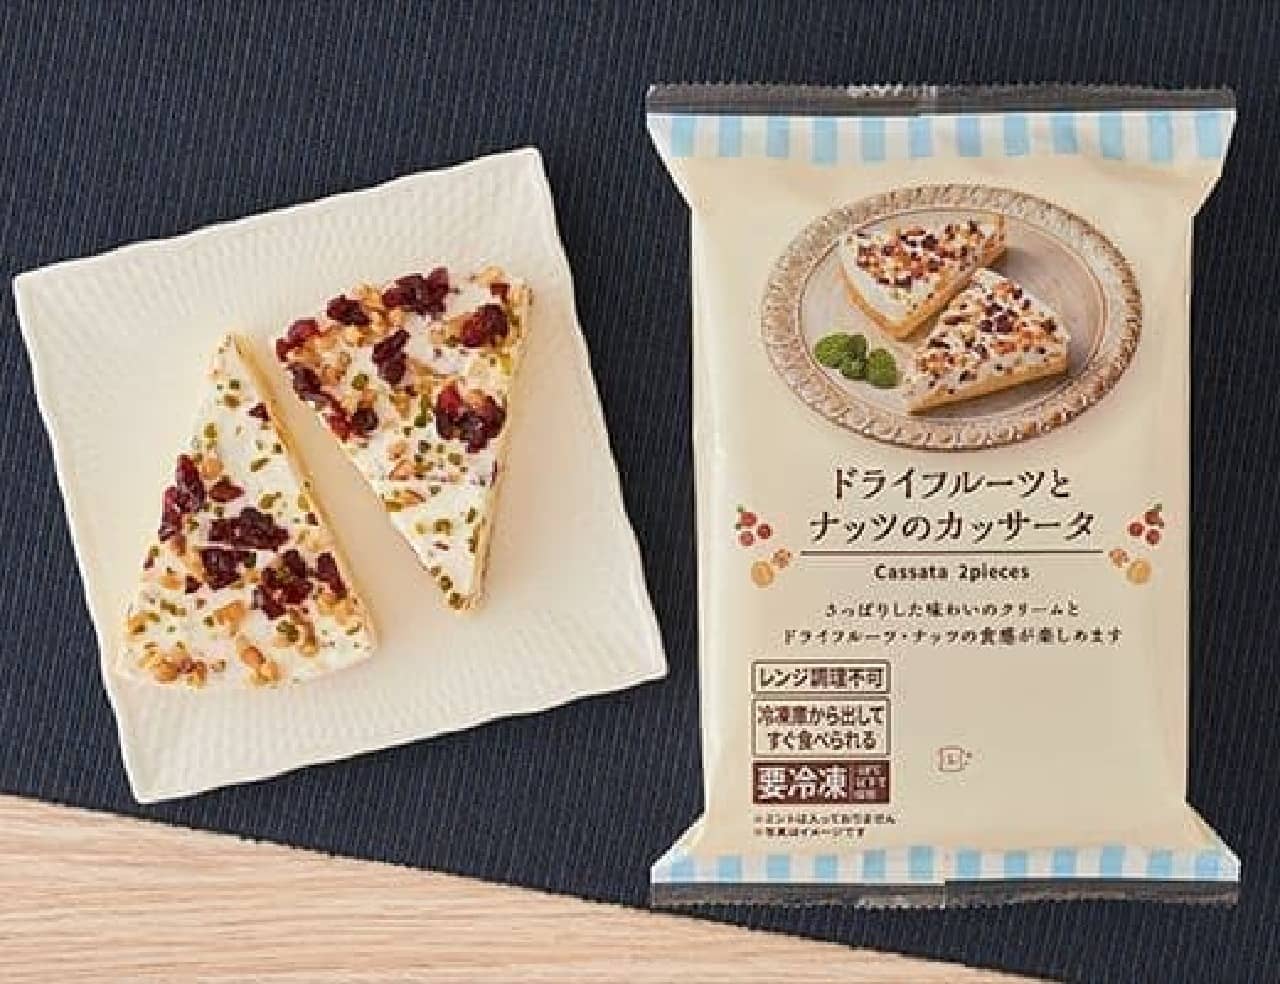 Lawson "Cassata of dried fruits and nuts"